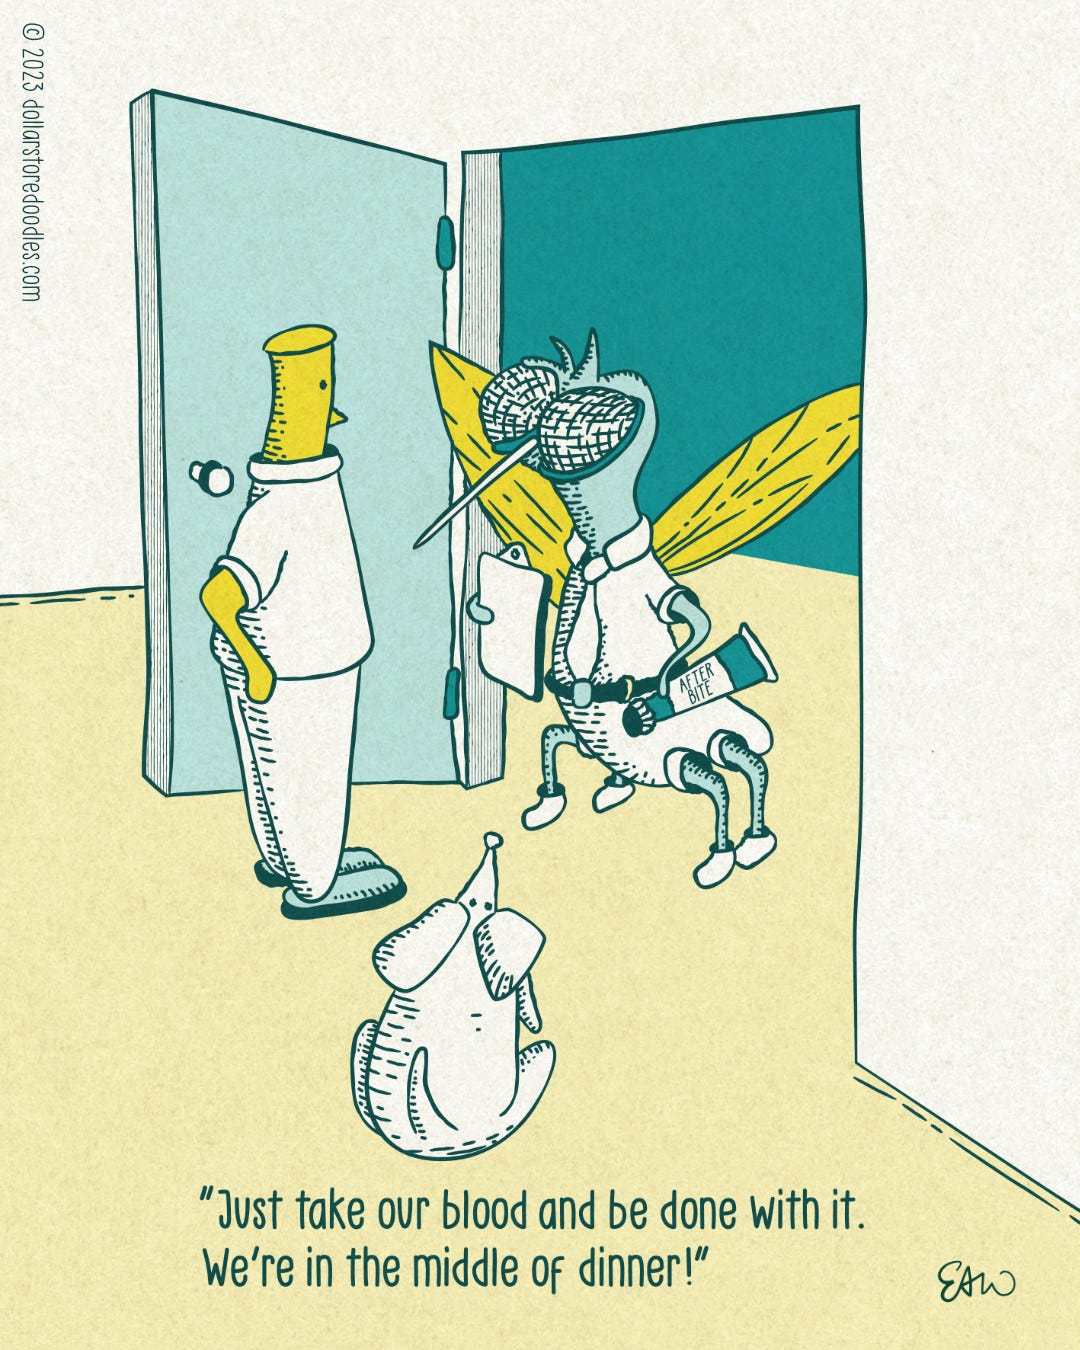 A single panel comic in monochrome teal colours with yellow highlights. A giant mosquito stands in the entryway of a house or apartment. The mosquito is sporting a necktie and appears to be dressed like a salesperson, holding a clipboard and a giant tube of “After Bite” cream. Opposite the mosquito stands the homeowner and their dog staring back in frustration. The caption reads, “Just take our blood and be done with it. We’re in the middle of dinner.”